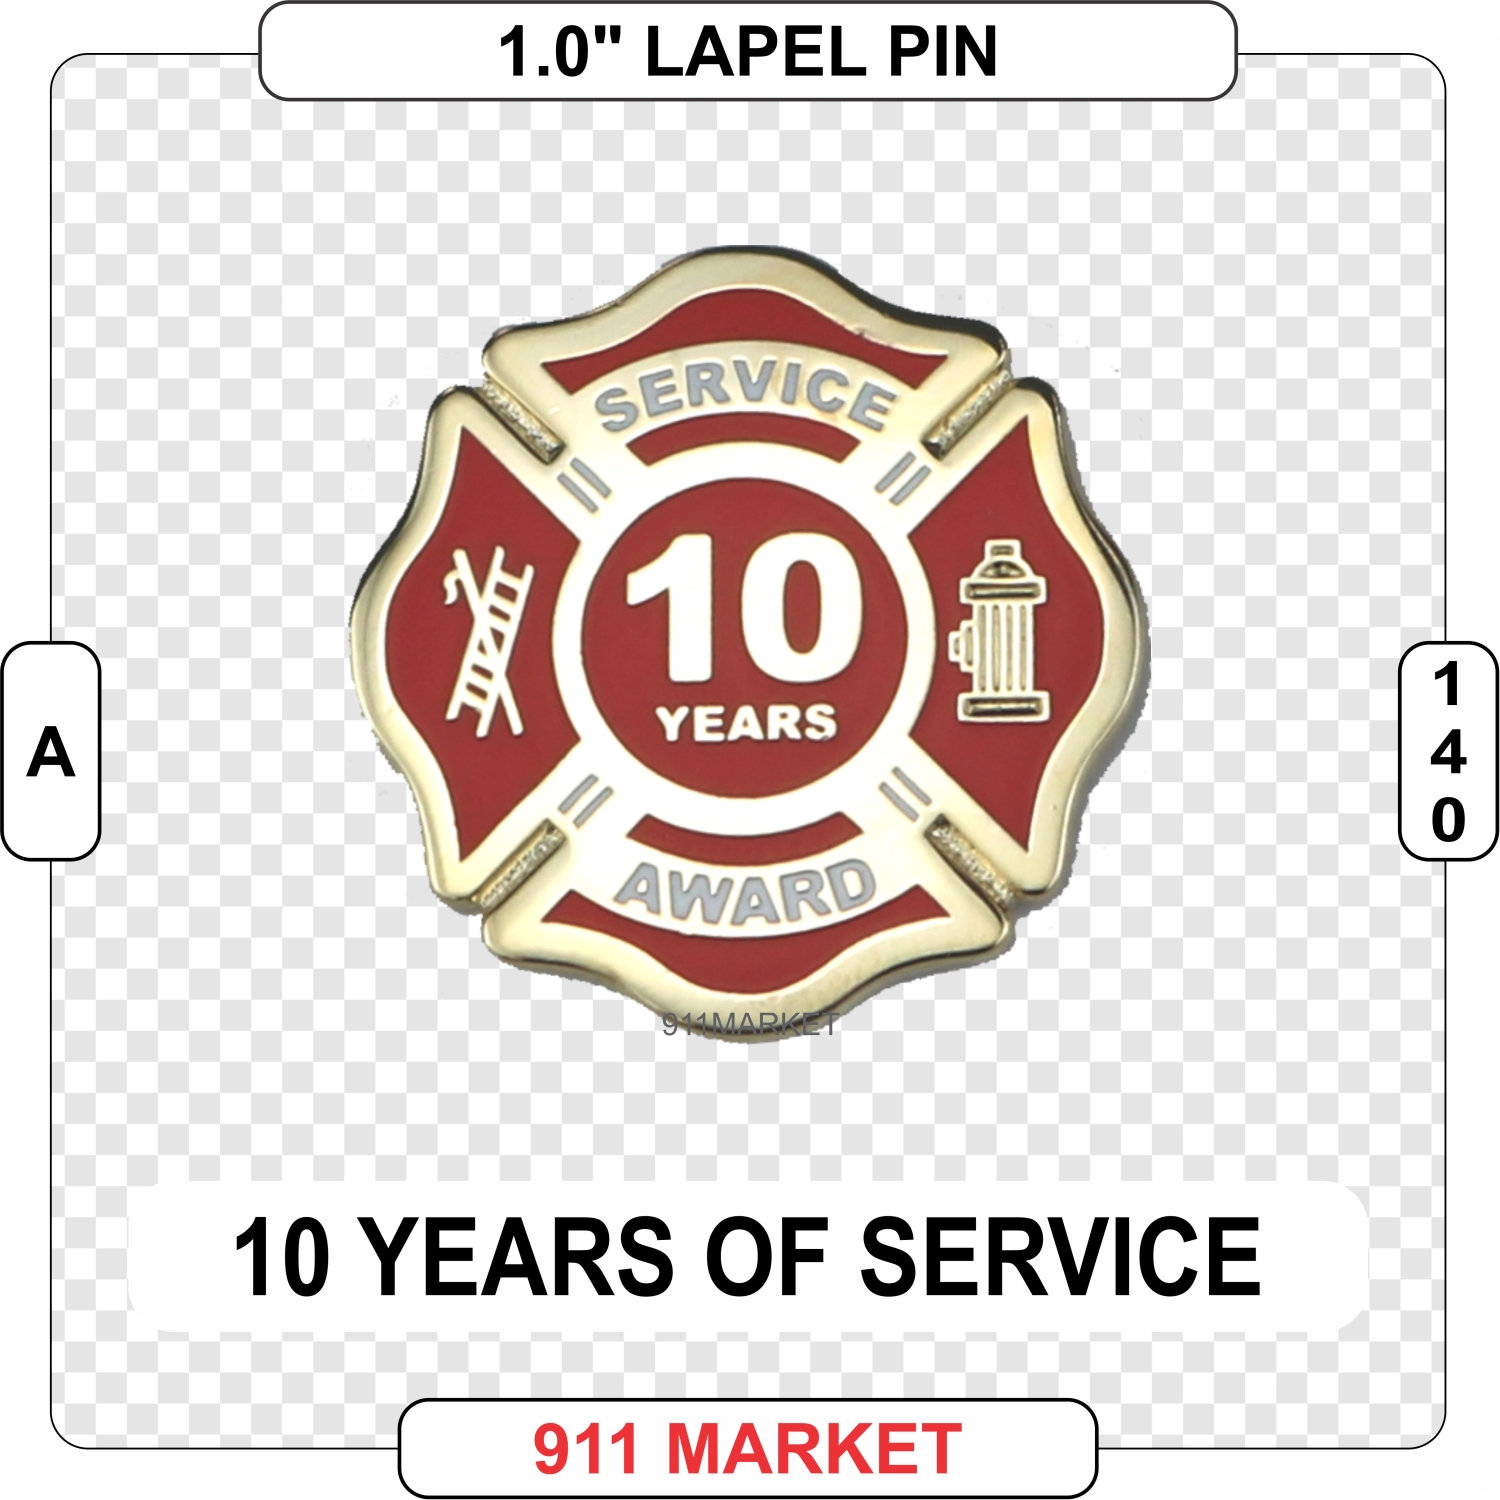 A 142 20 Years Service Award Lapel Pin Length of Firefighter Fire Department 